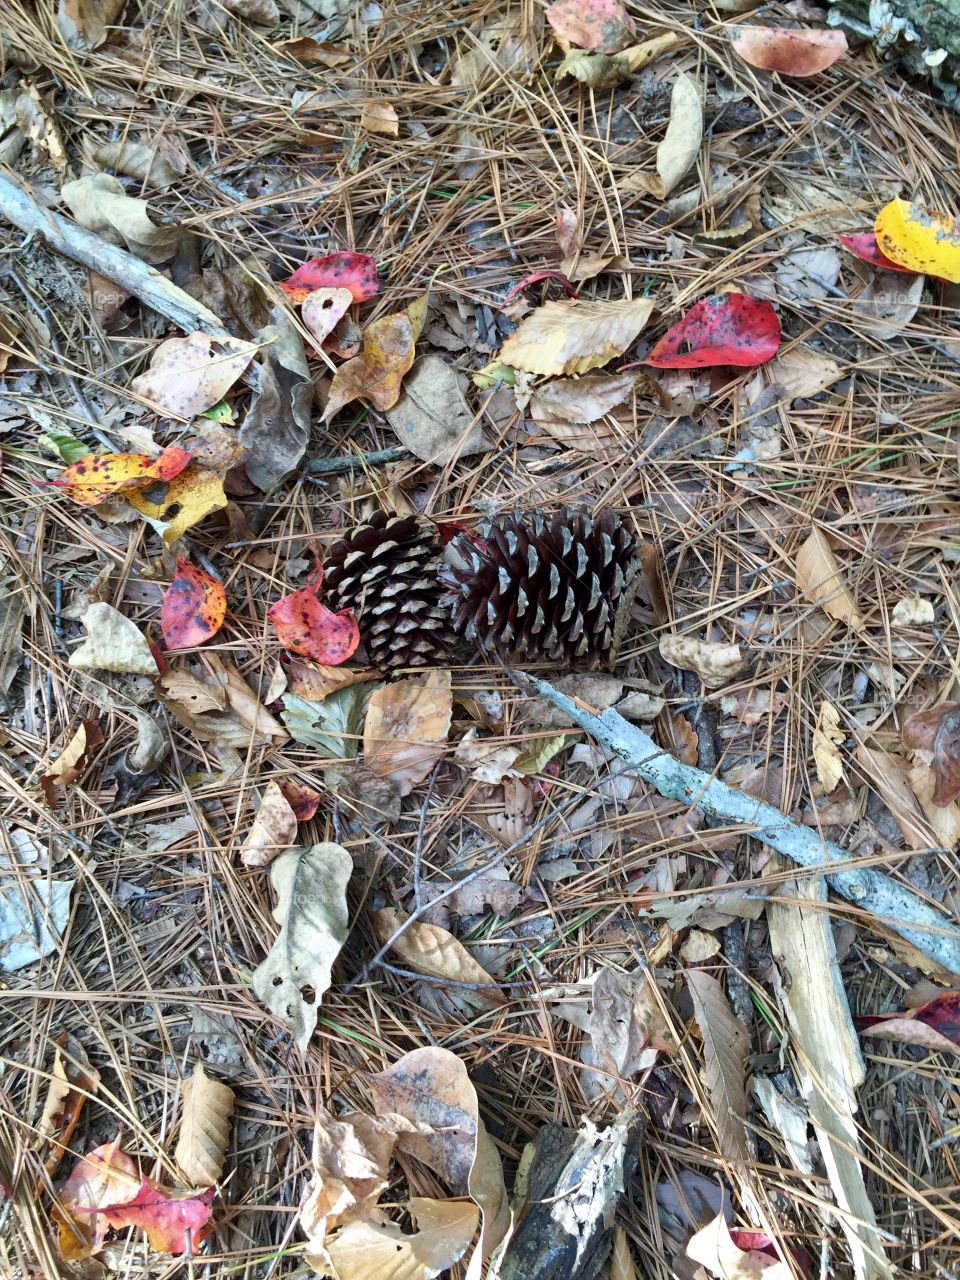 Pine cones on a path. These pine cones were found just as they are...nestled in a autumn leaf litter on a forest path.  